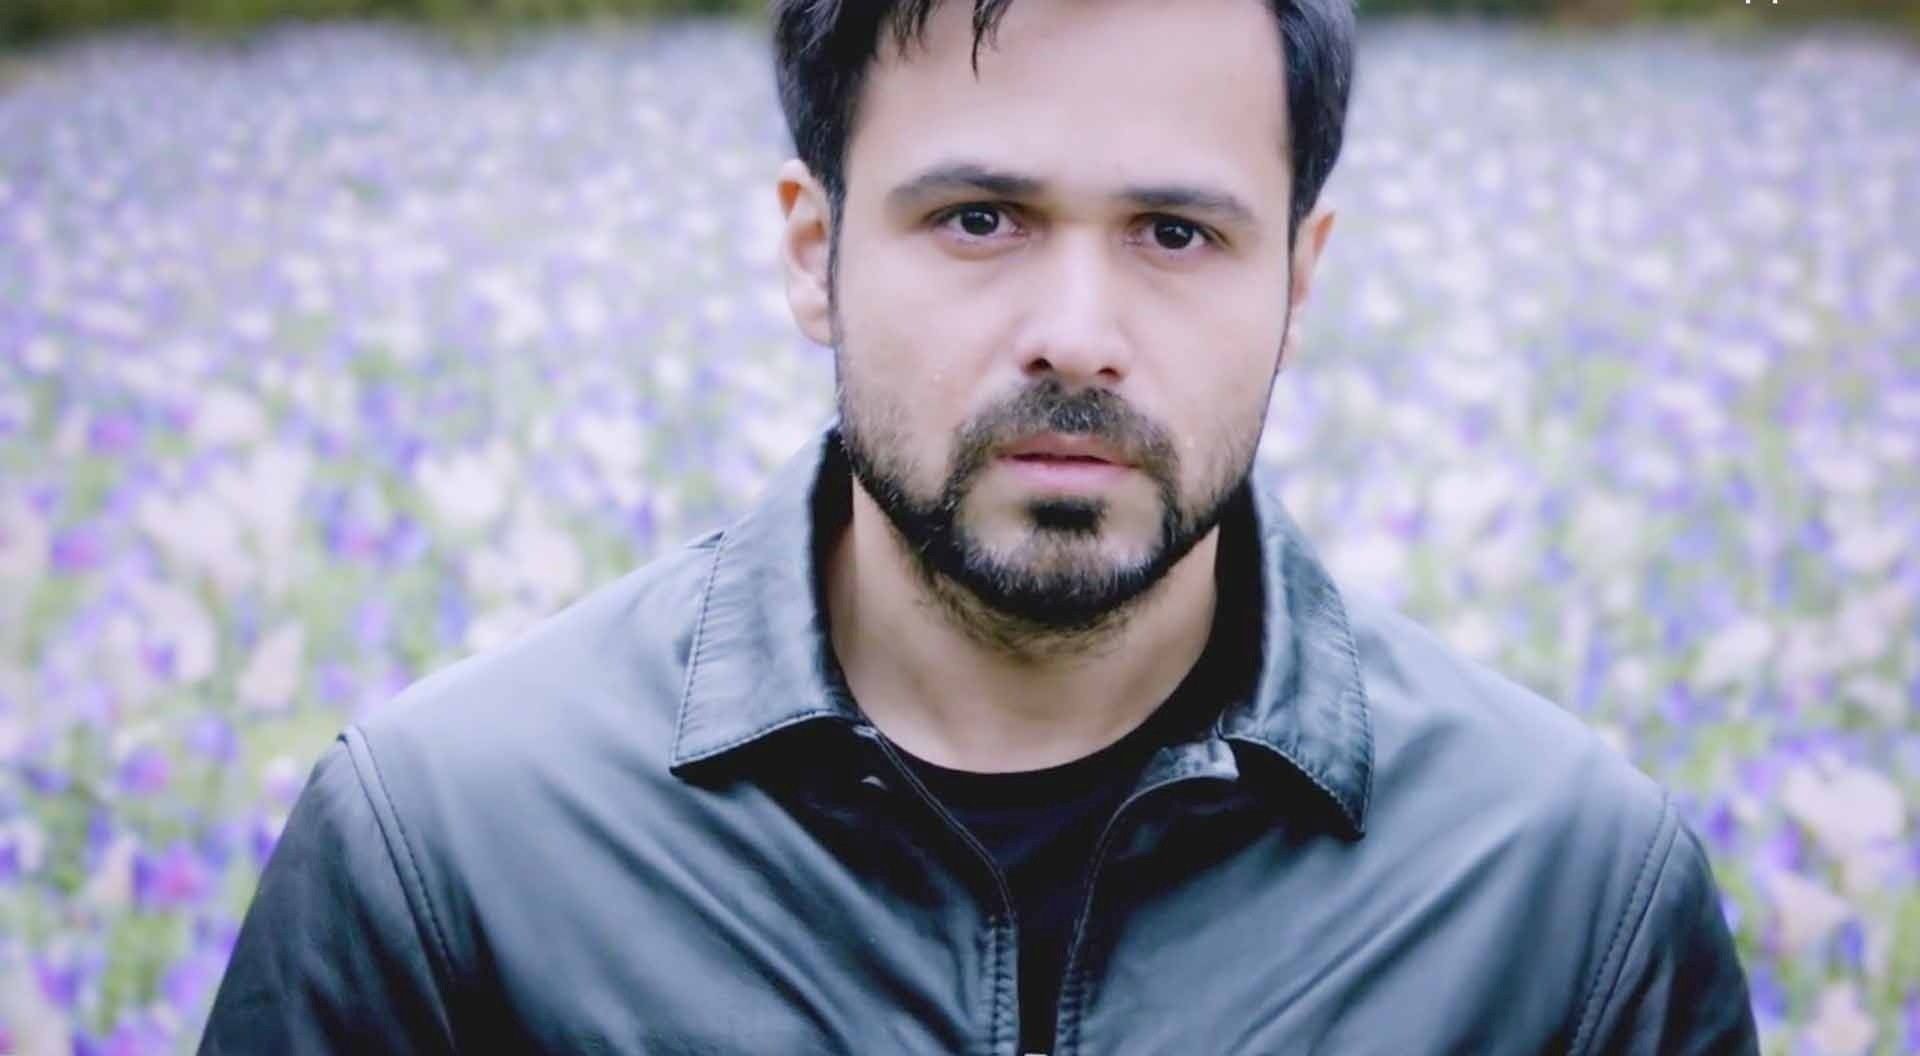 50 Top Best Emraan Hashmi Images And Hd Wallpapers Indiawords Com Emraan hashmi (@emraanhashmi.8055) on tiktok | 352.6k likes. 50 top best emraan hashmi images and hd